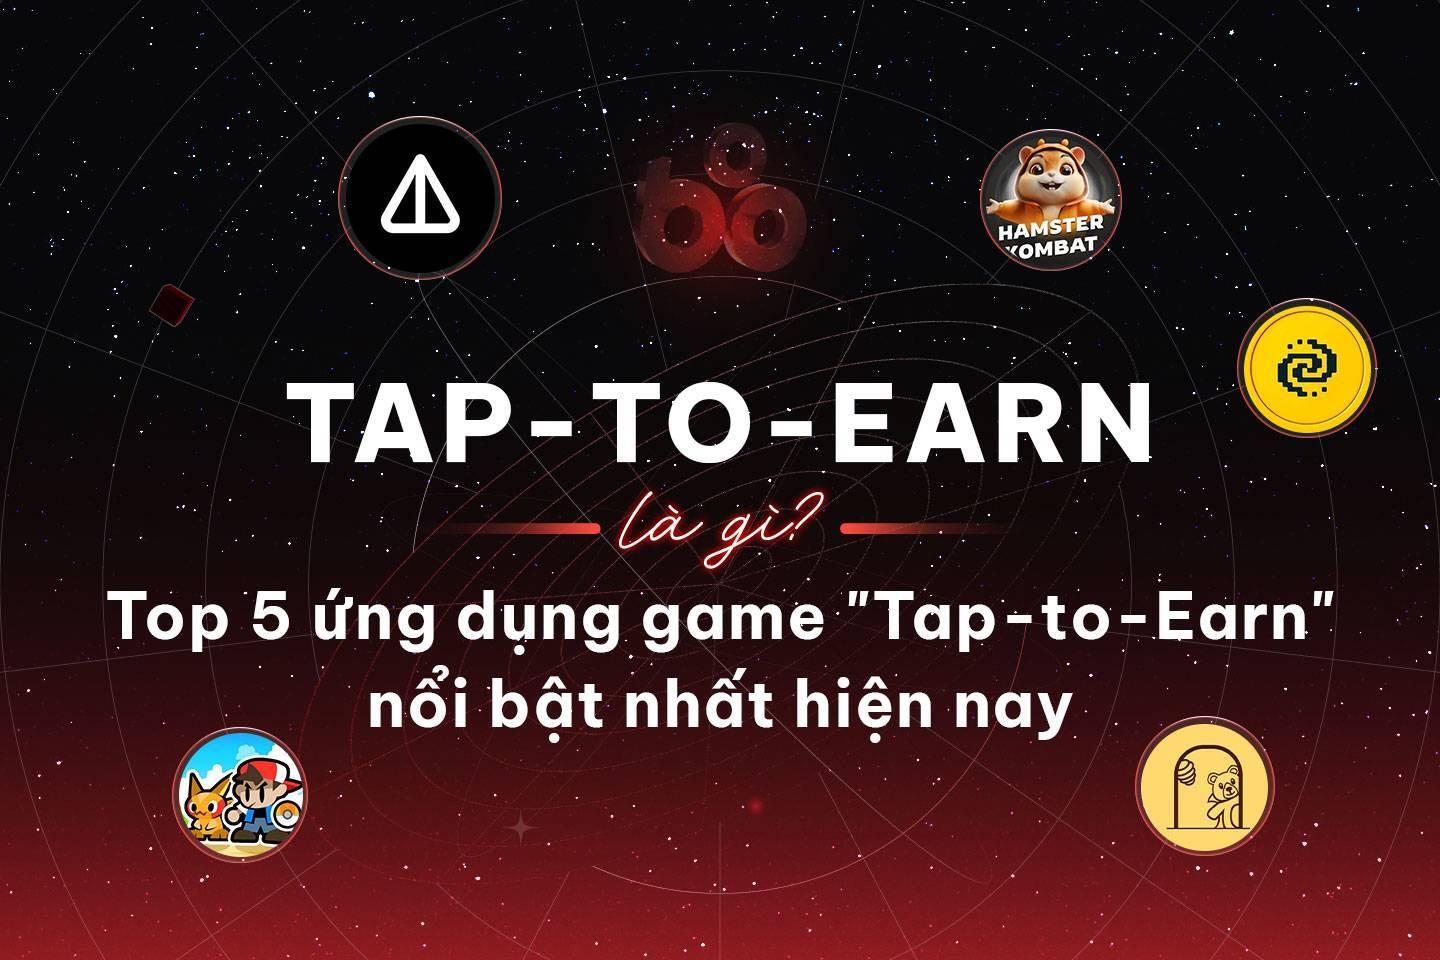 tap-to-earn-la-gi-top-5-ung-dung-game-tap-to-earn-noi-bat-nhat-hien-nay